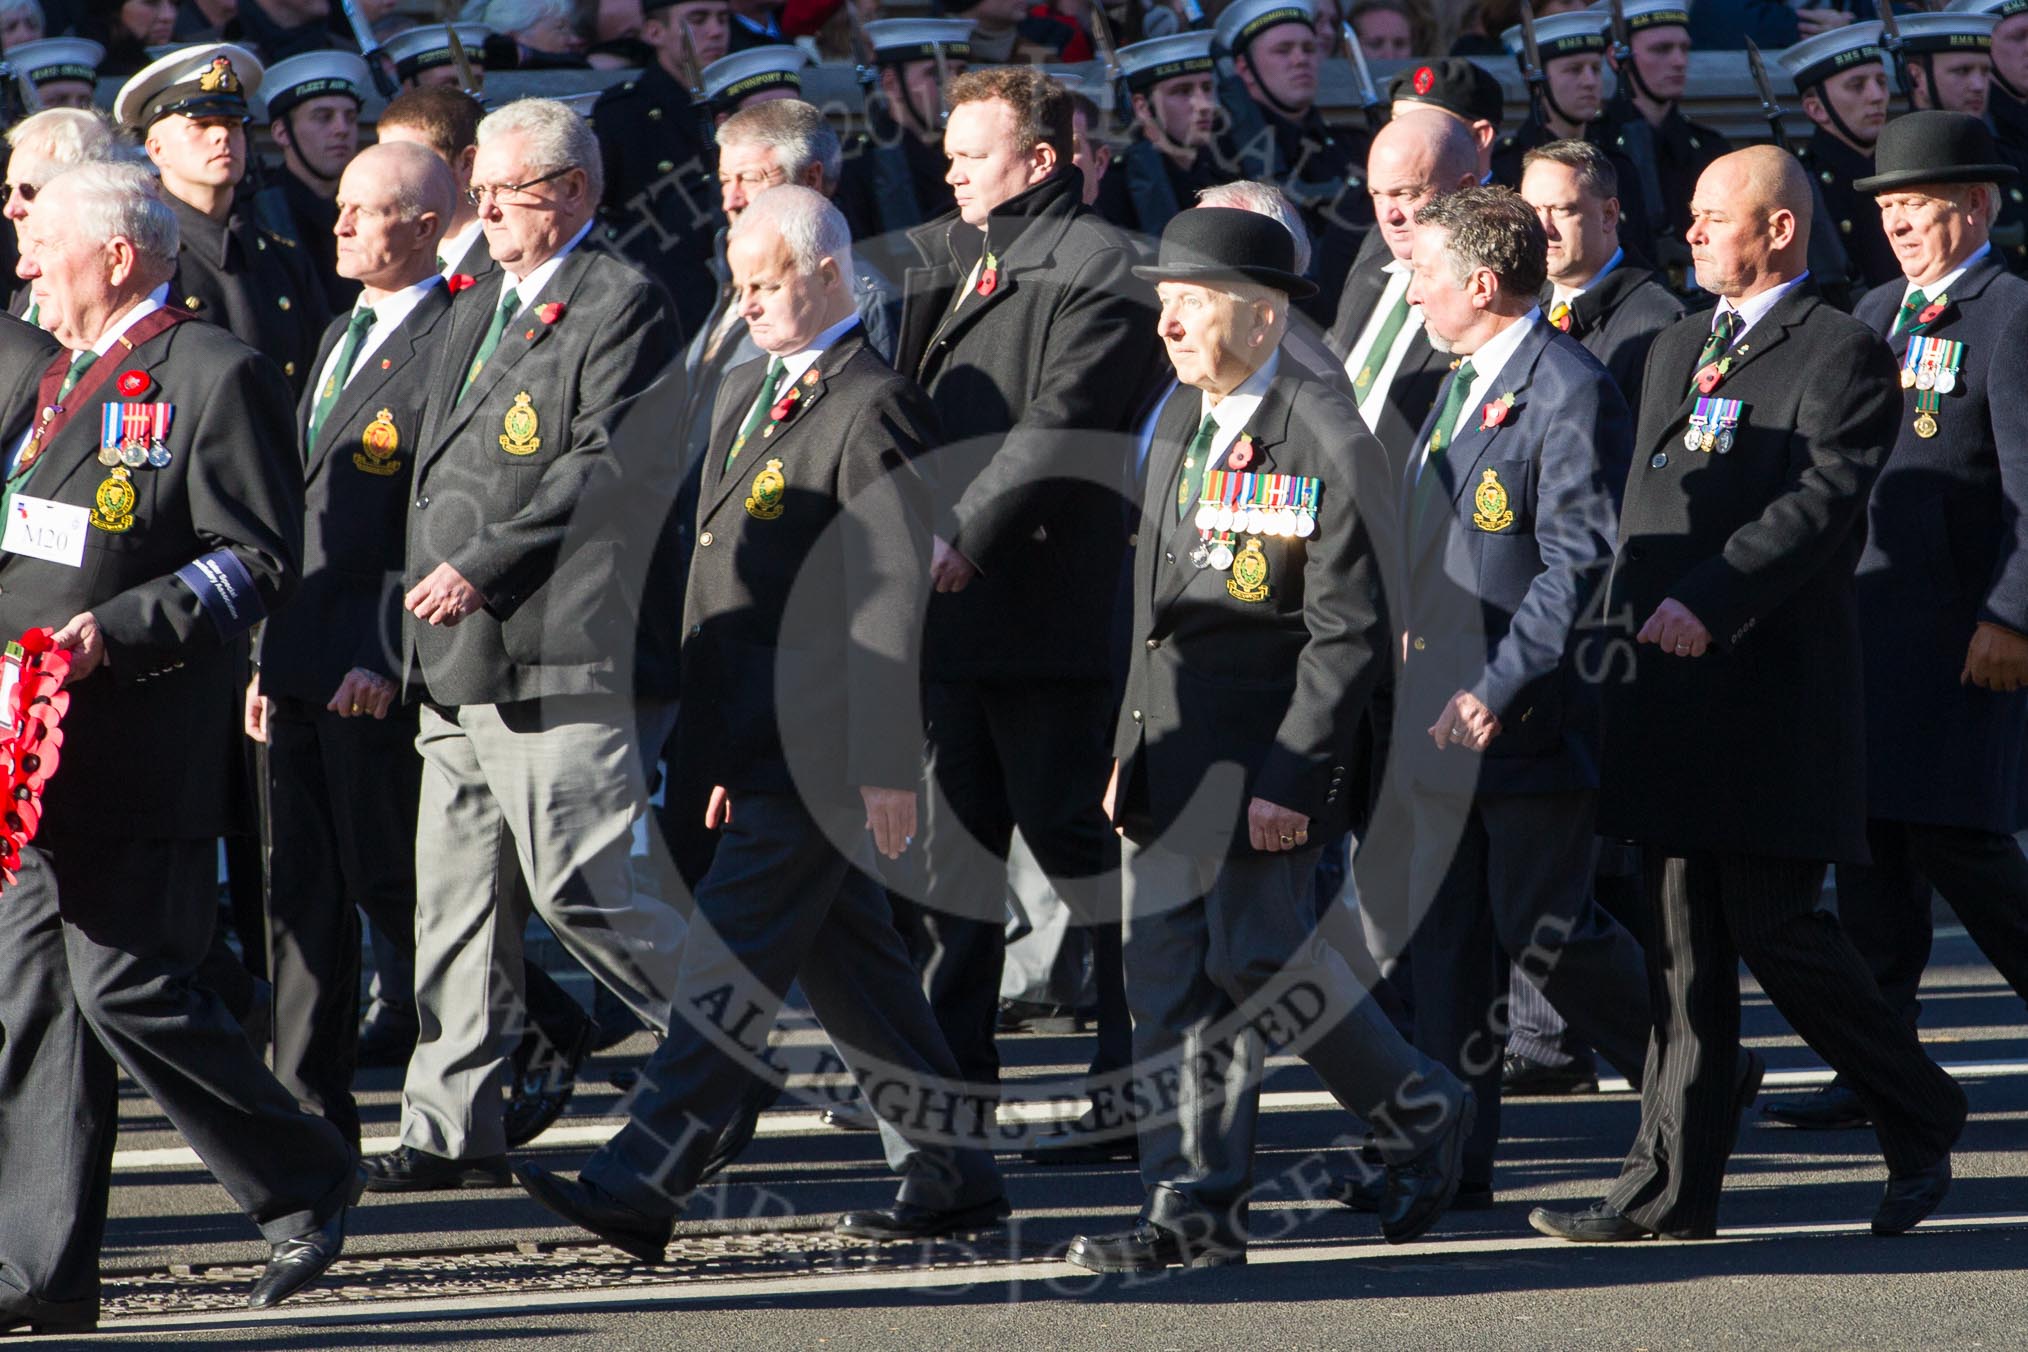 Remembrance Sunday 2012 Cenotaph March Past: Group M20 - Ulster Special Constabulary Association..
Whitehall, Cenotaph,
London SW1,

United Kingdom,
on 11 November 2012 at 12:12, image #1559